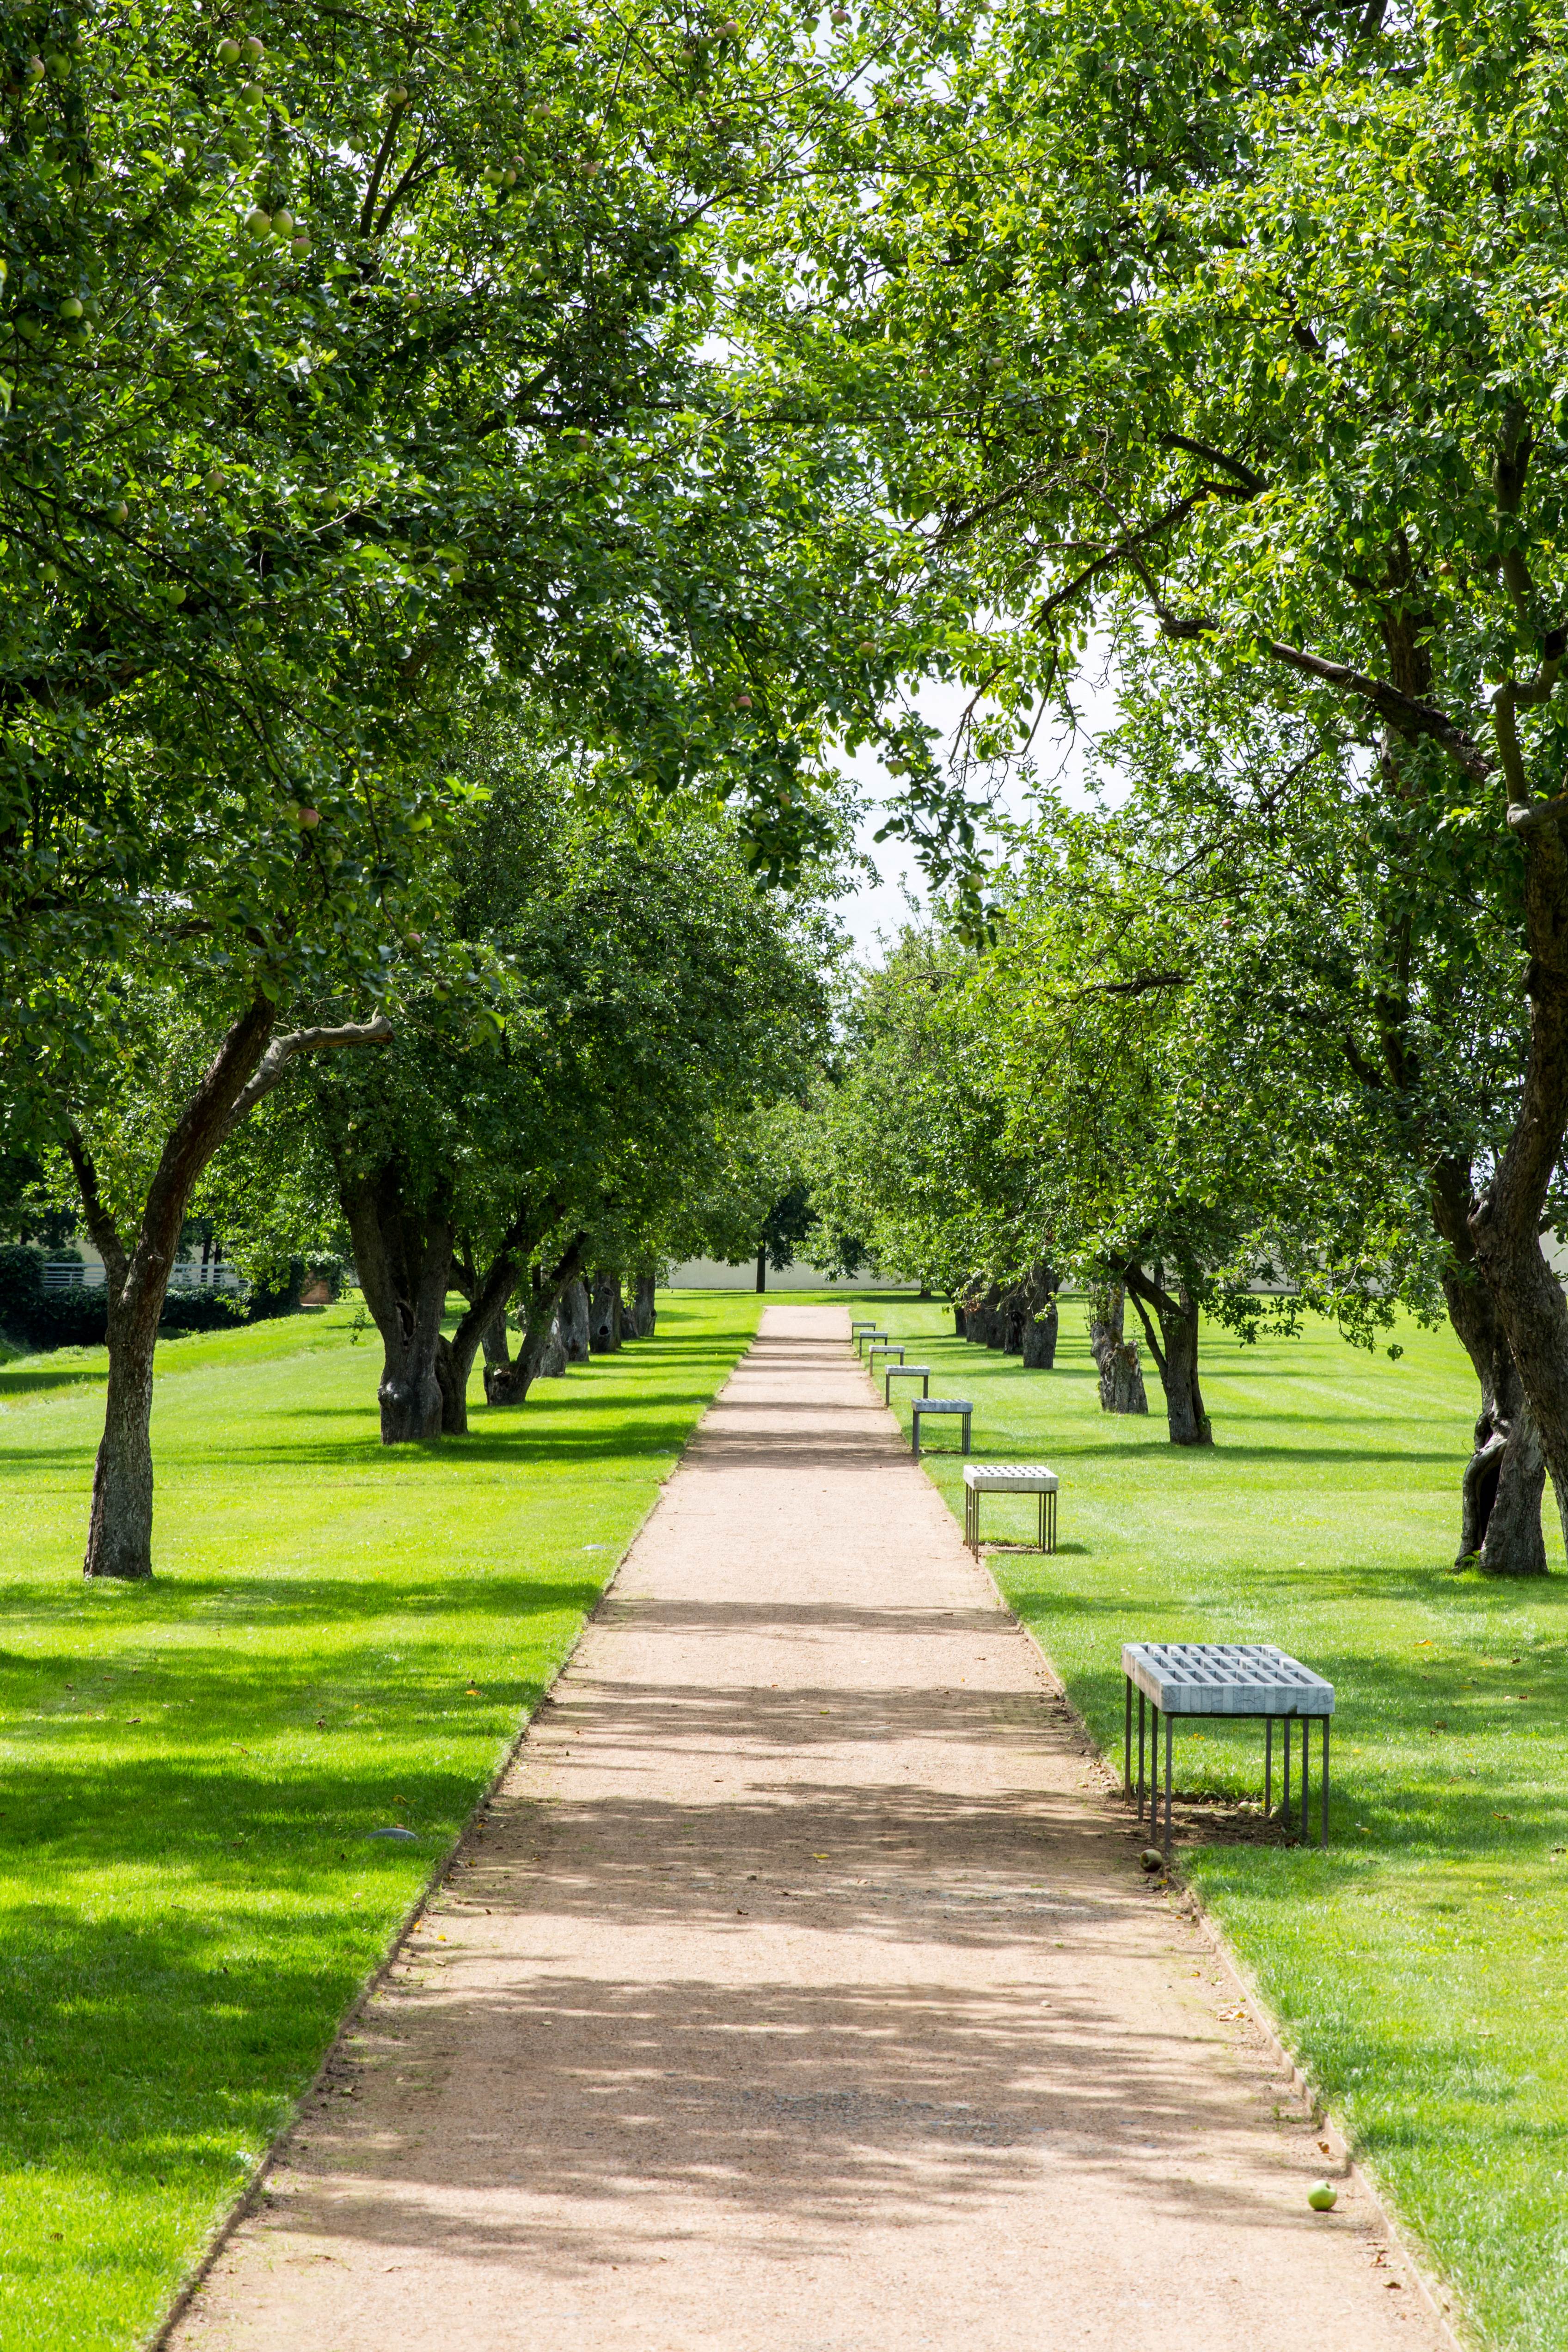 Pathway through green park, with trees on either side and park benches on the right